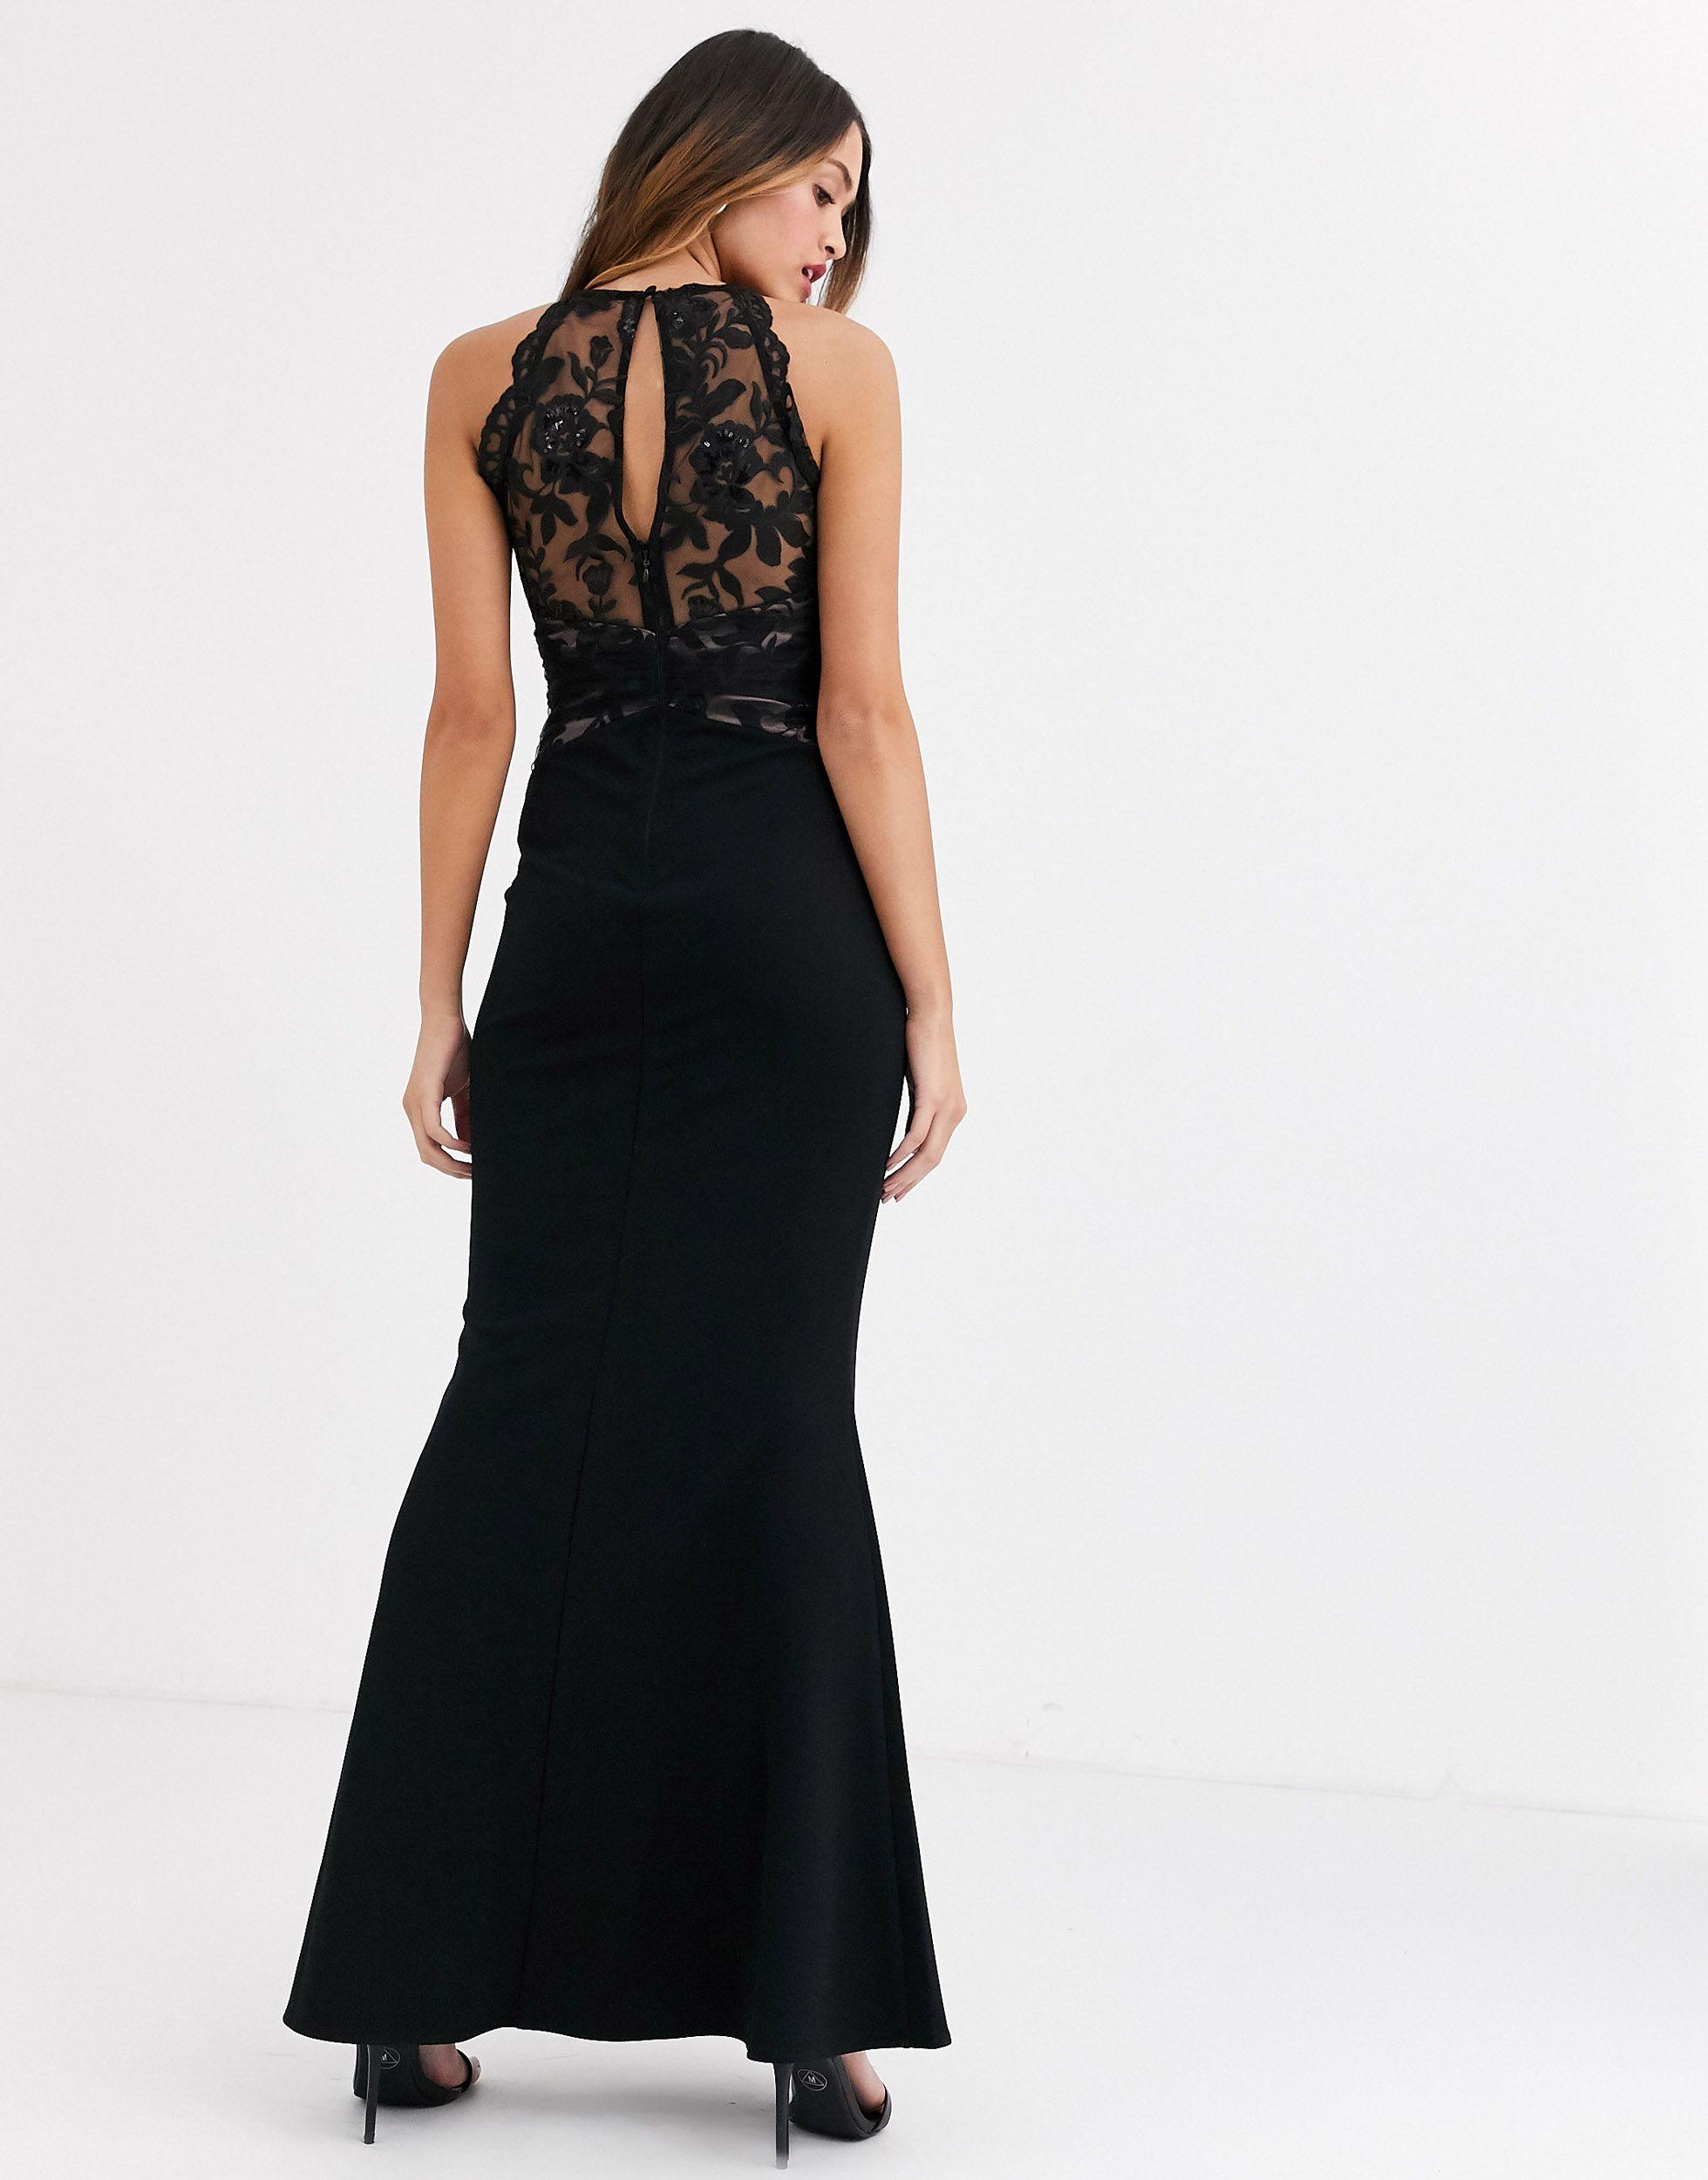 Lipsy Lace Top High Neck Maxi Dress in Black